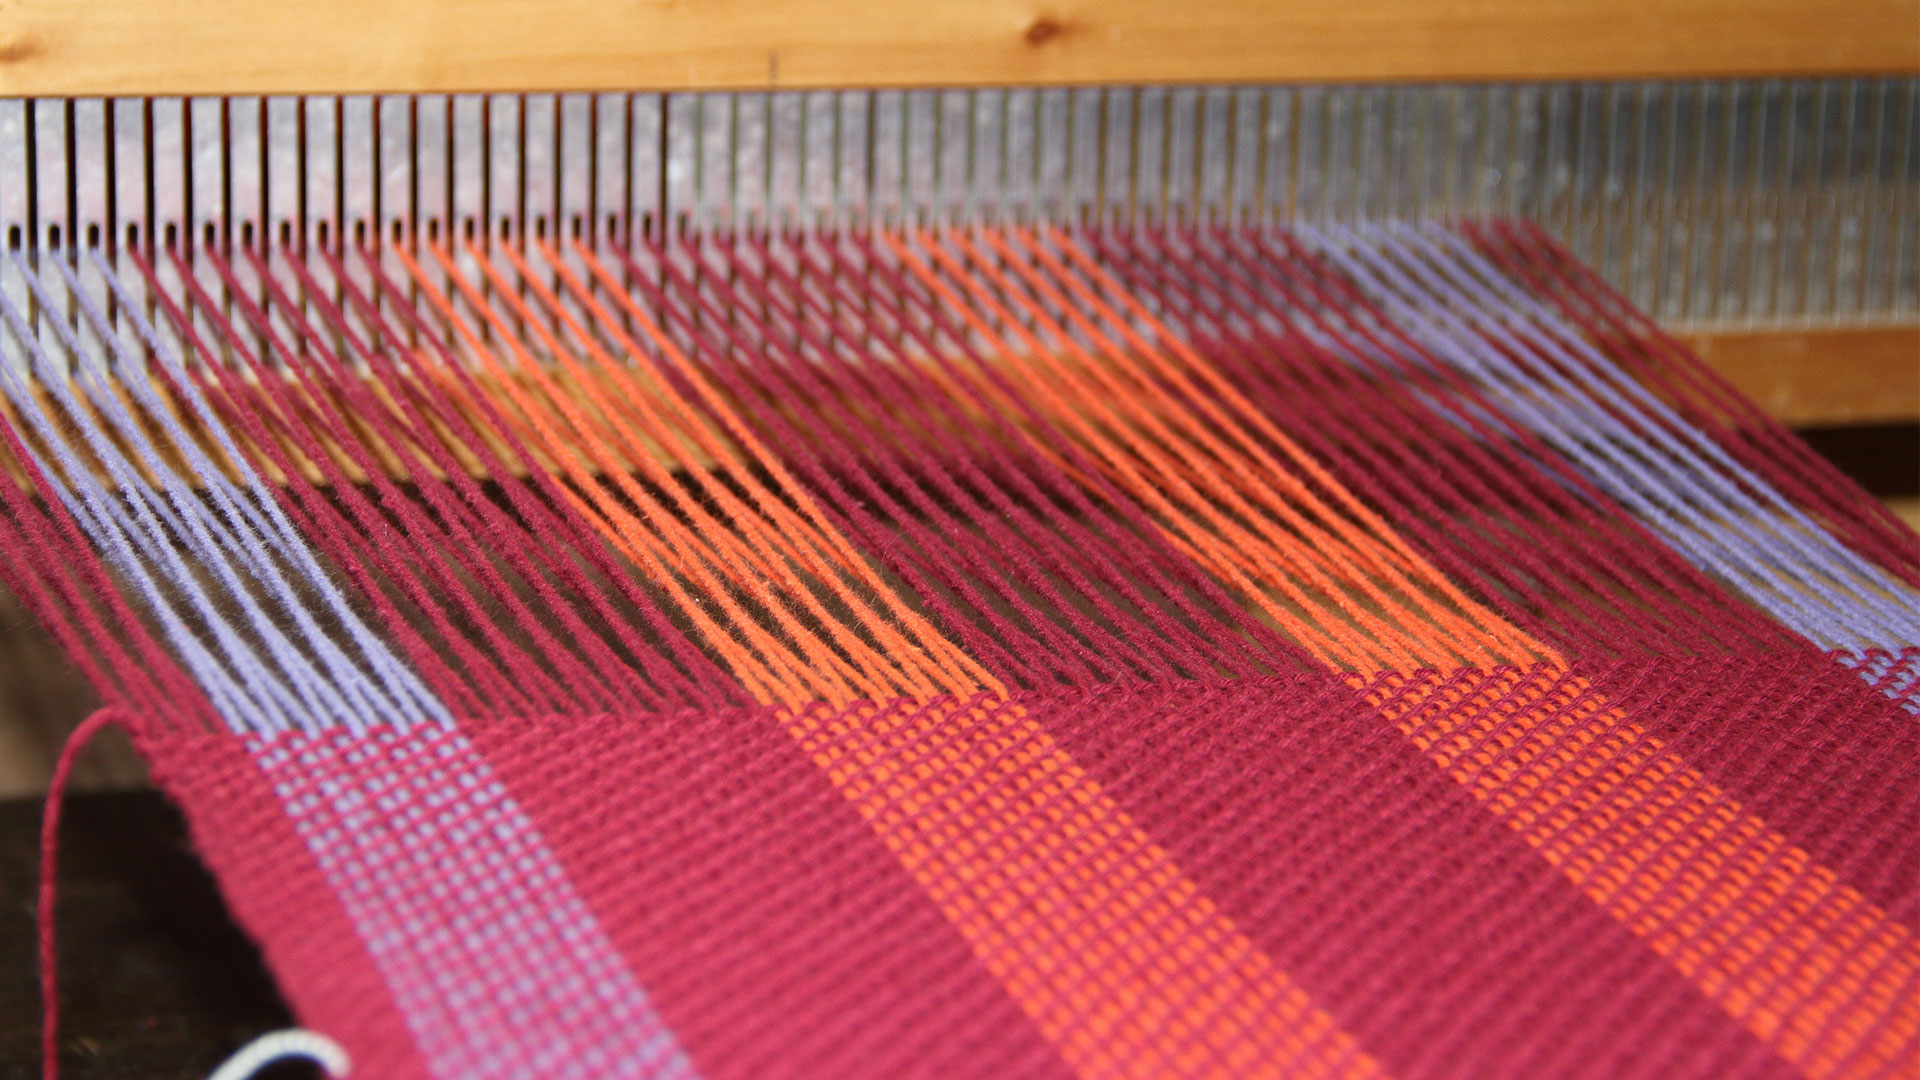 Sanitary and eco-friendly Turkish towels being woven